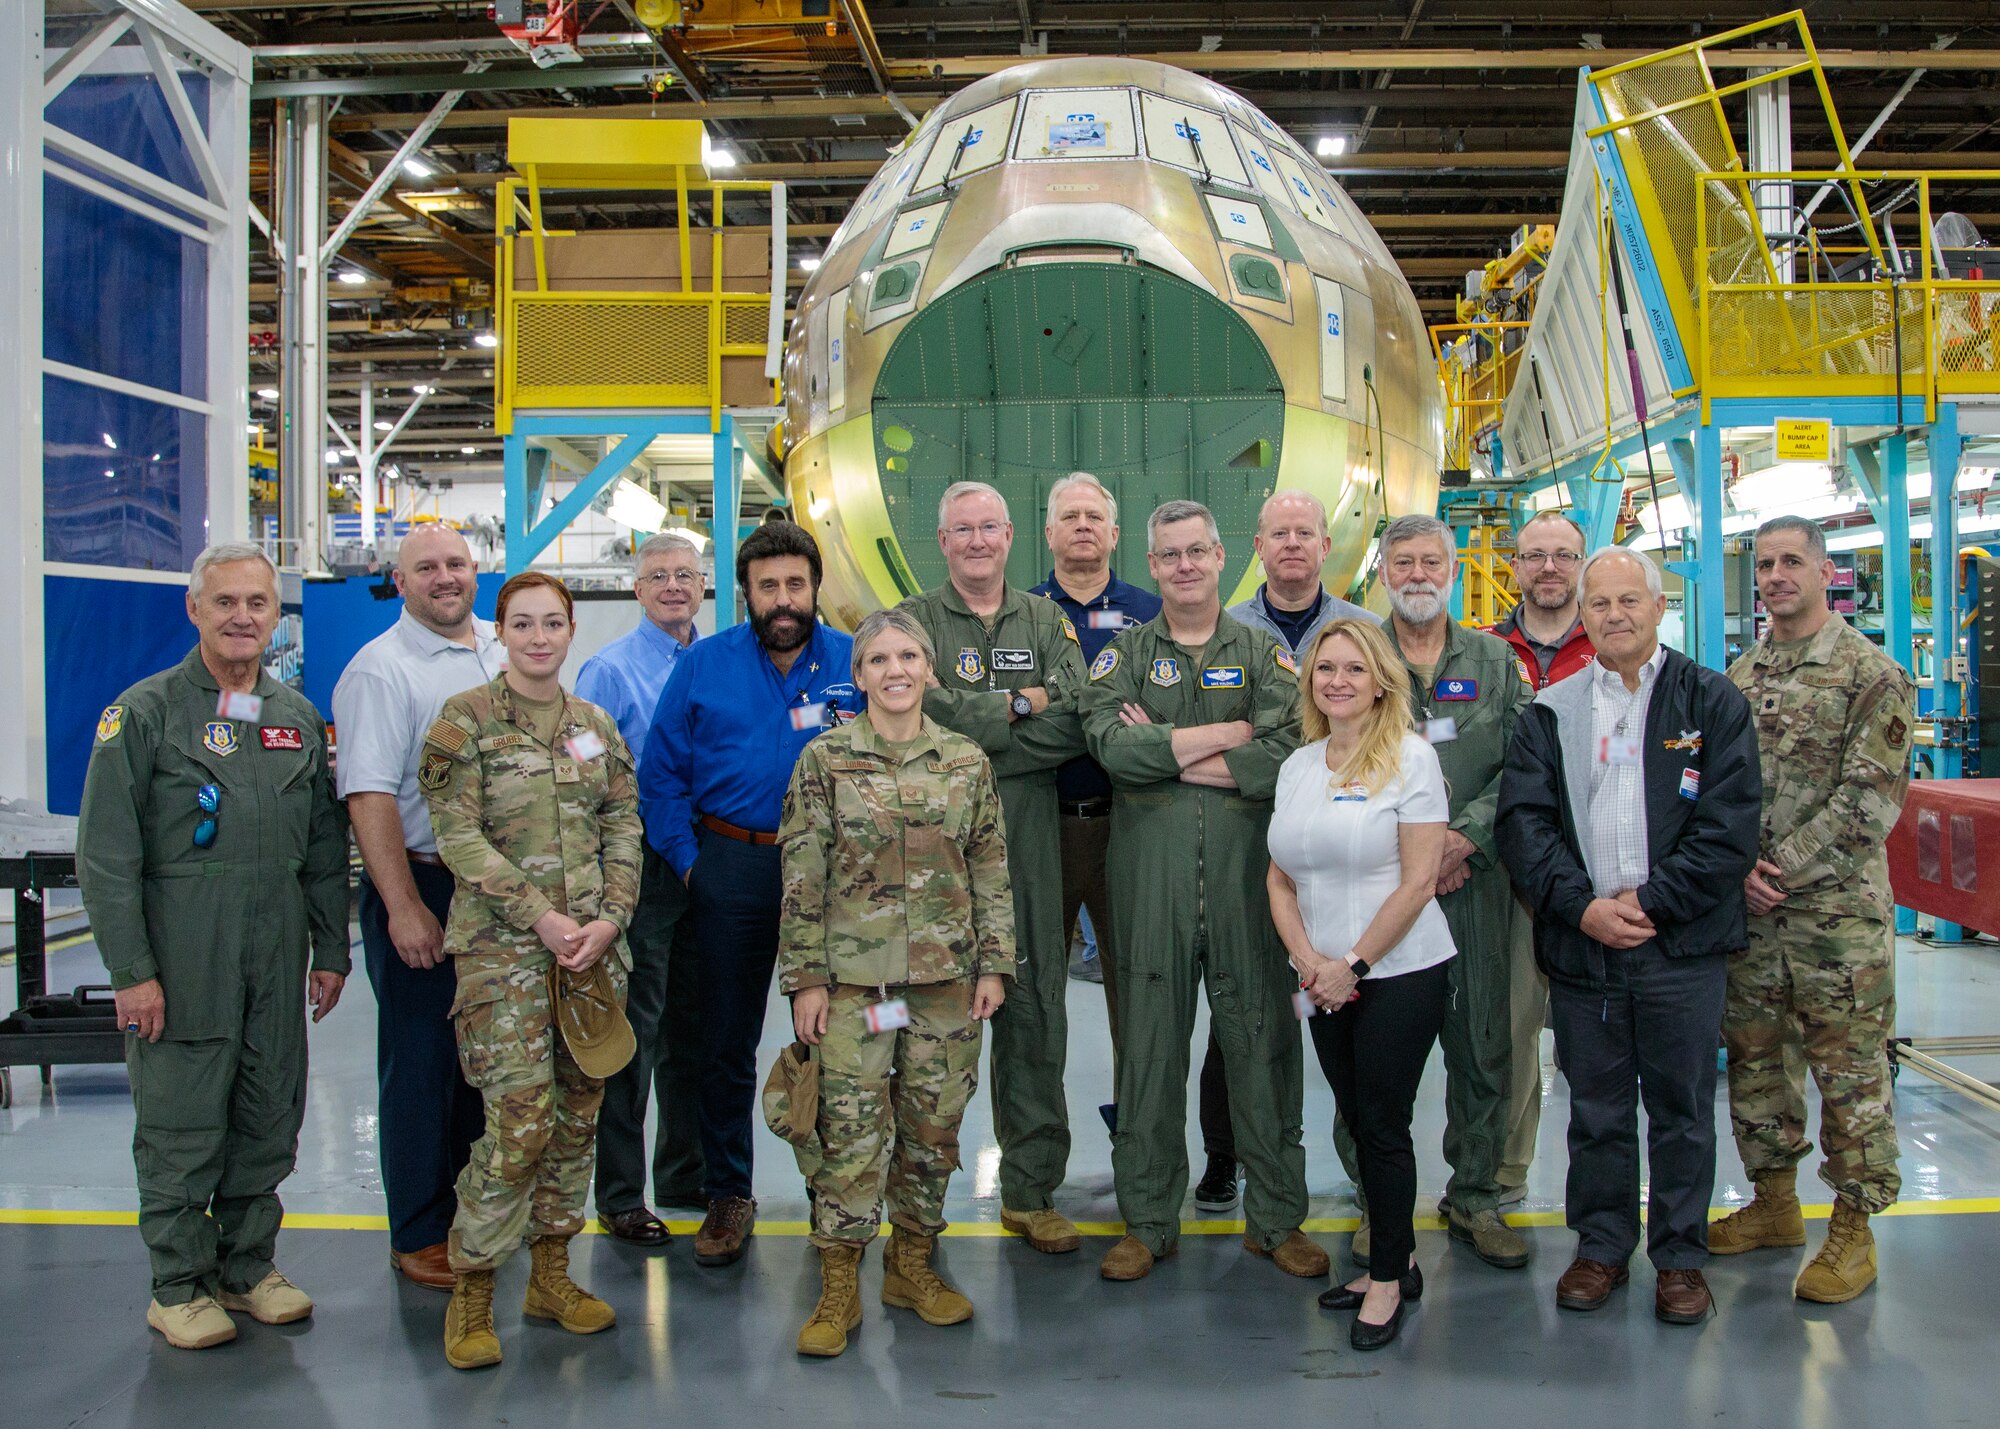 Participants in the 910th Airlift Wing’s civic leader tour to Dobbins Air Reserve Base, Georgia, pose for a photo in front of a new C-130J Super Hercules aircraft being built at the Lockheed-Martin plant, May 11, 2023.